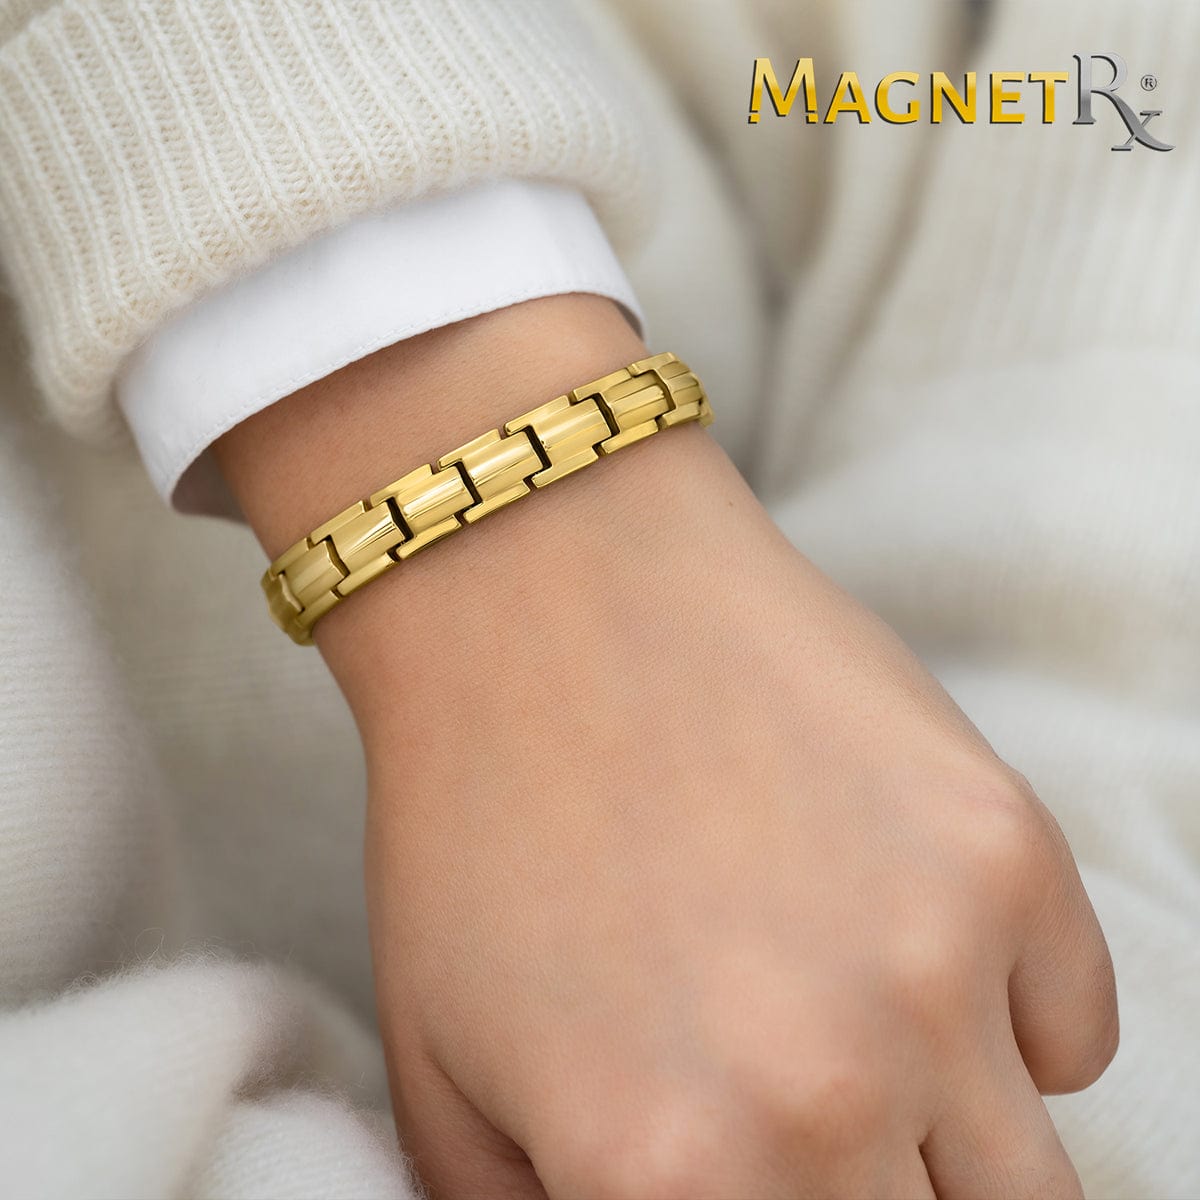 Magnetic Therapy Jewellery  Magnetic Bracelets  Magnetic Wristbands   Bioflow AU